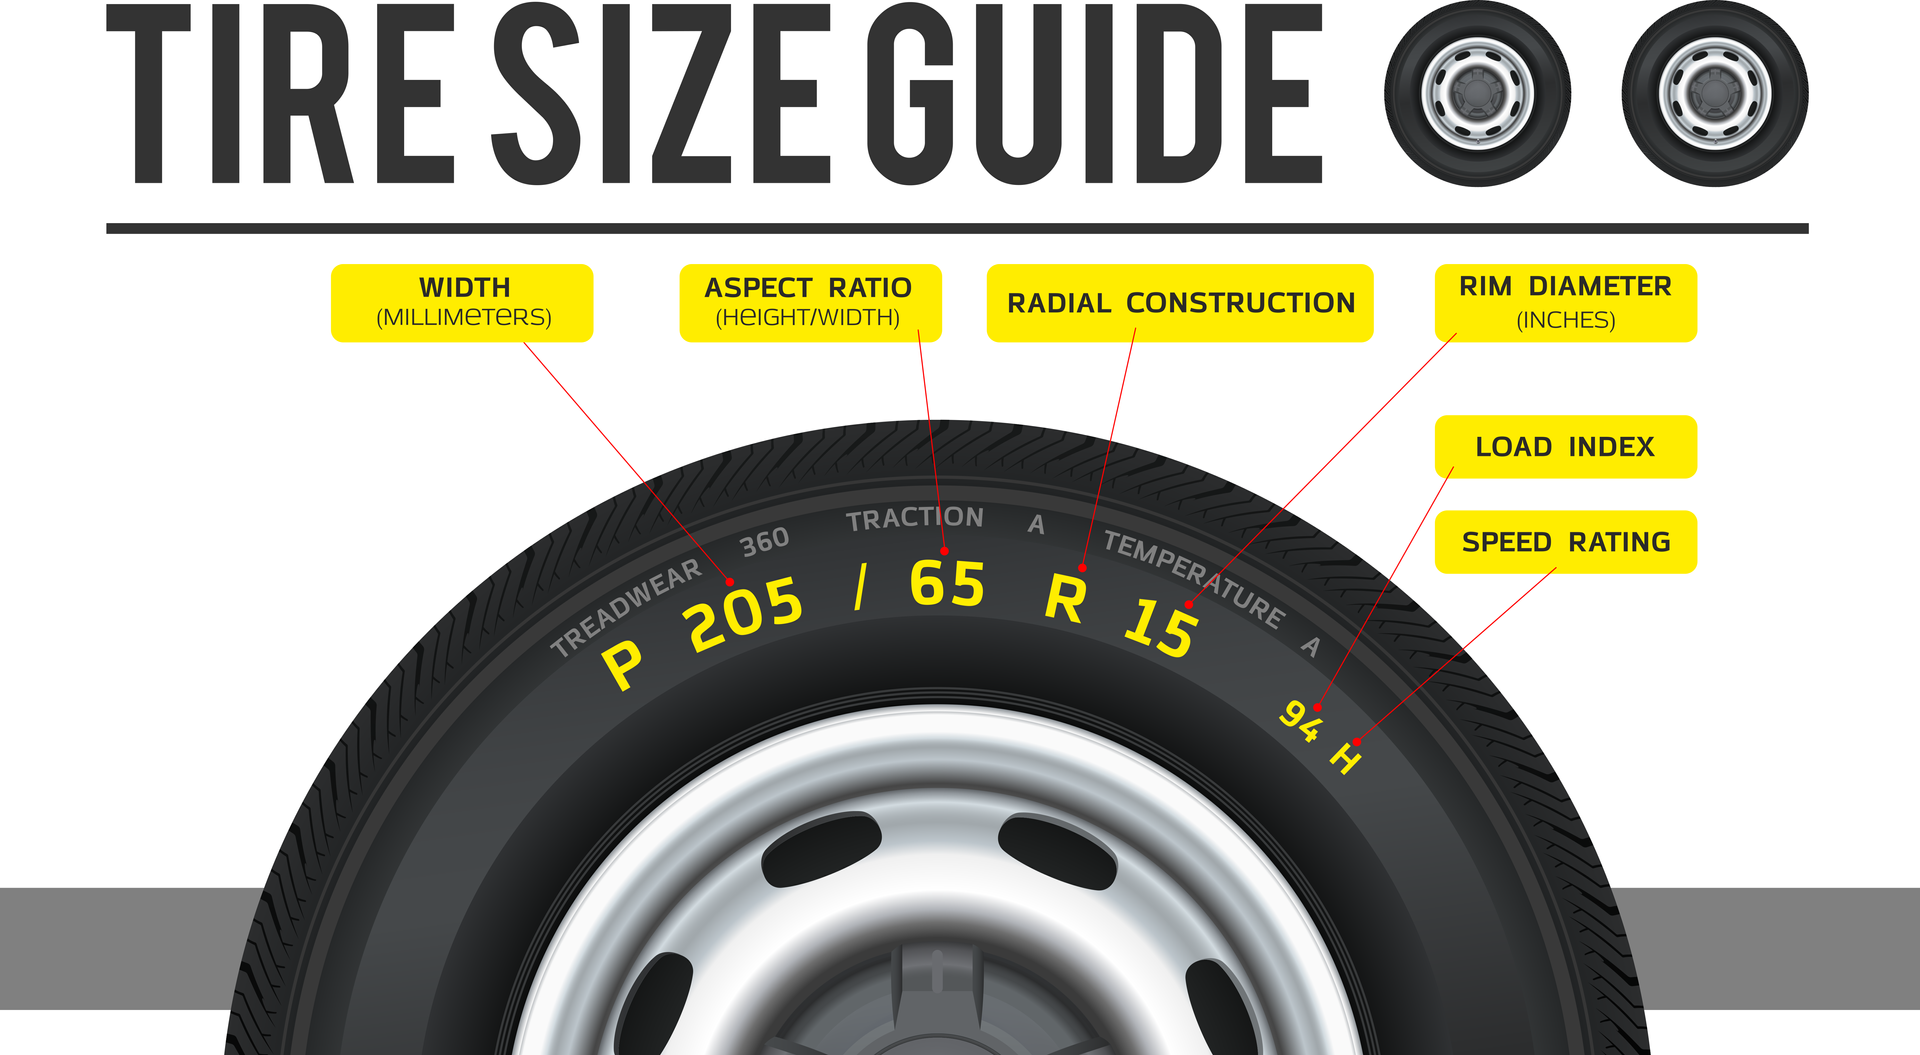 Tire size fitment guide